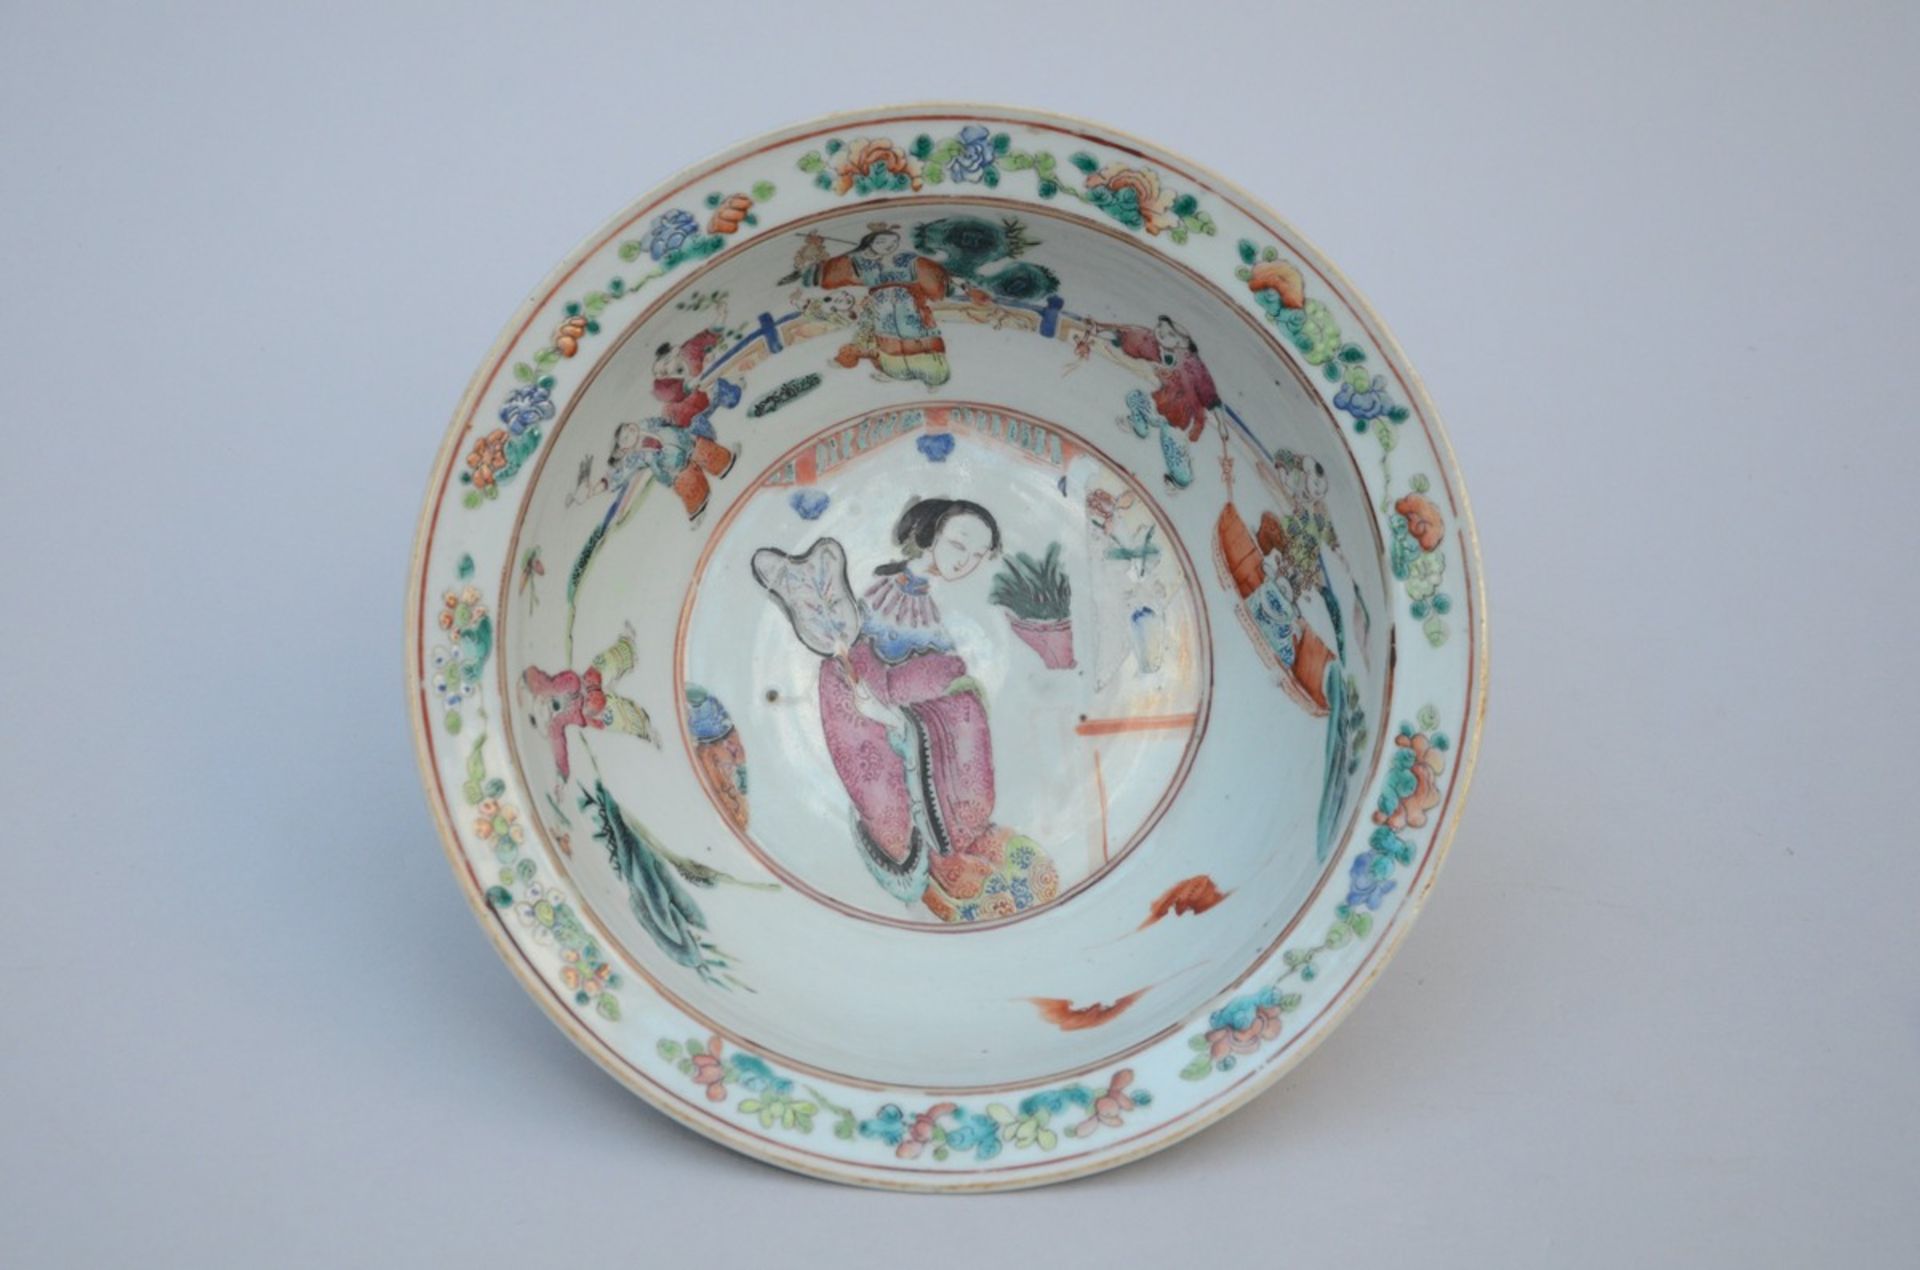 Basin in Chinese porcelain 'lady with a fan', 19th century (dia29cm) (*)